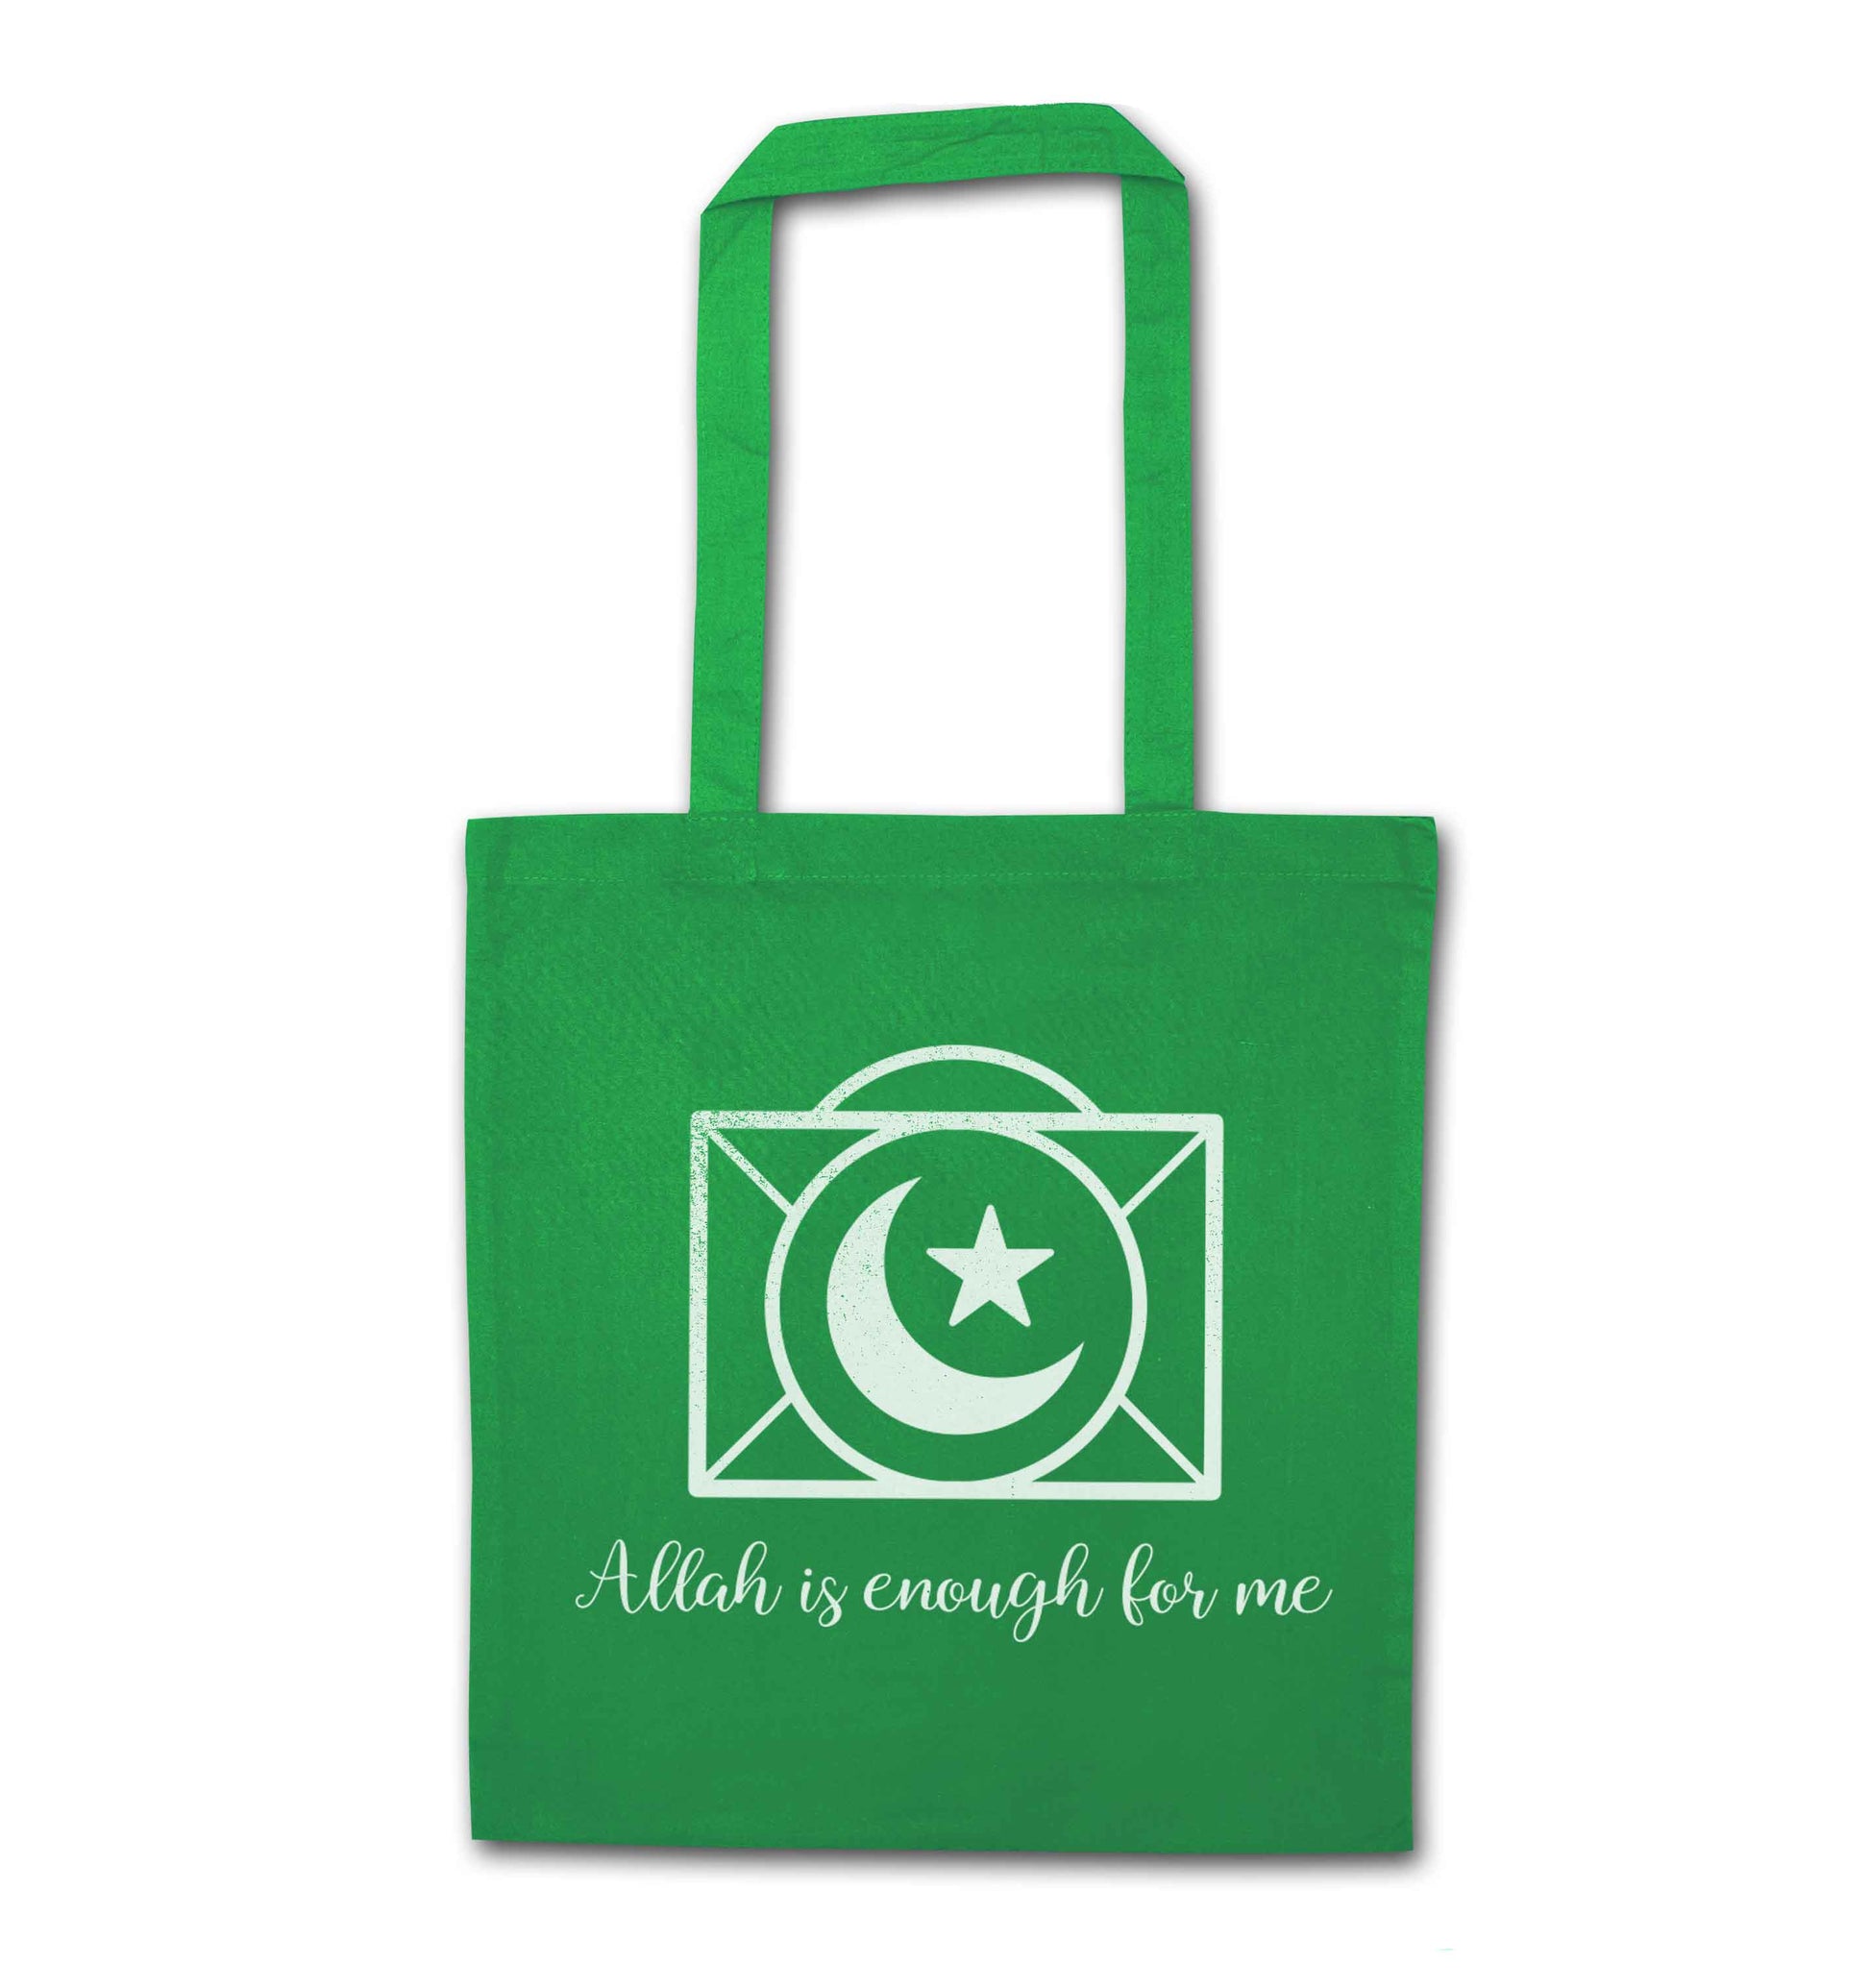 Allah is enough for me green tote bag